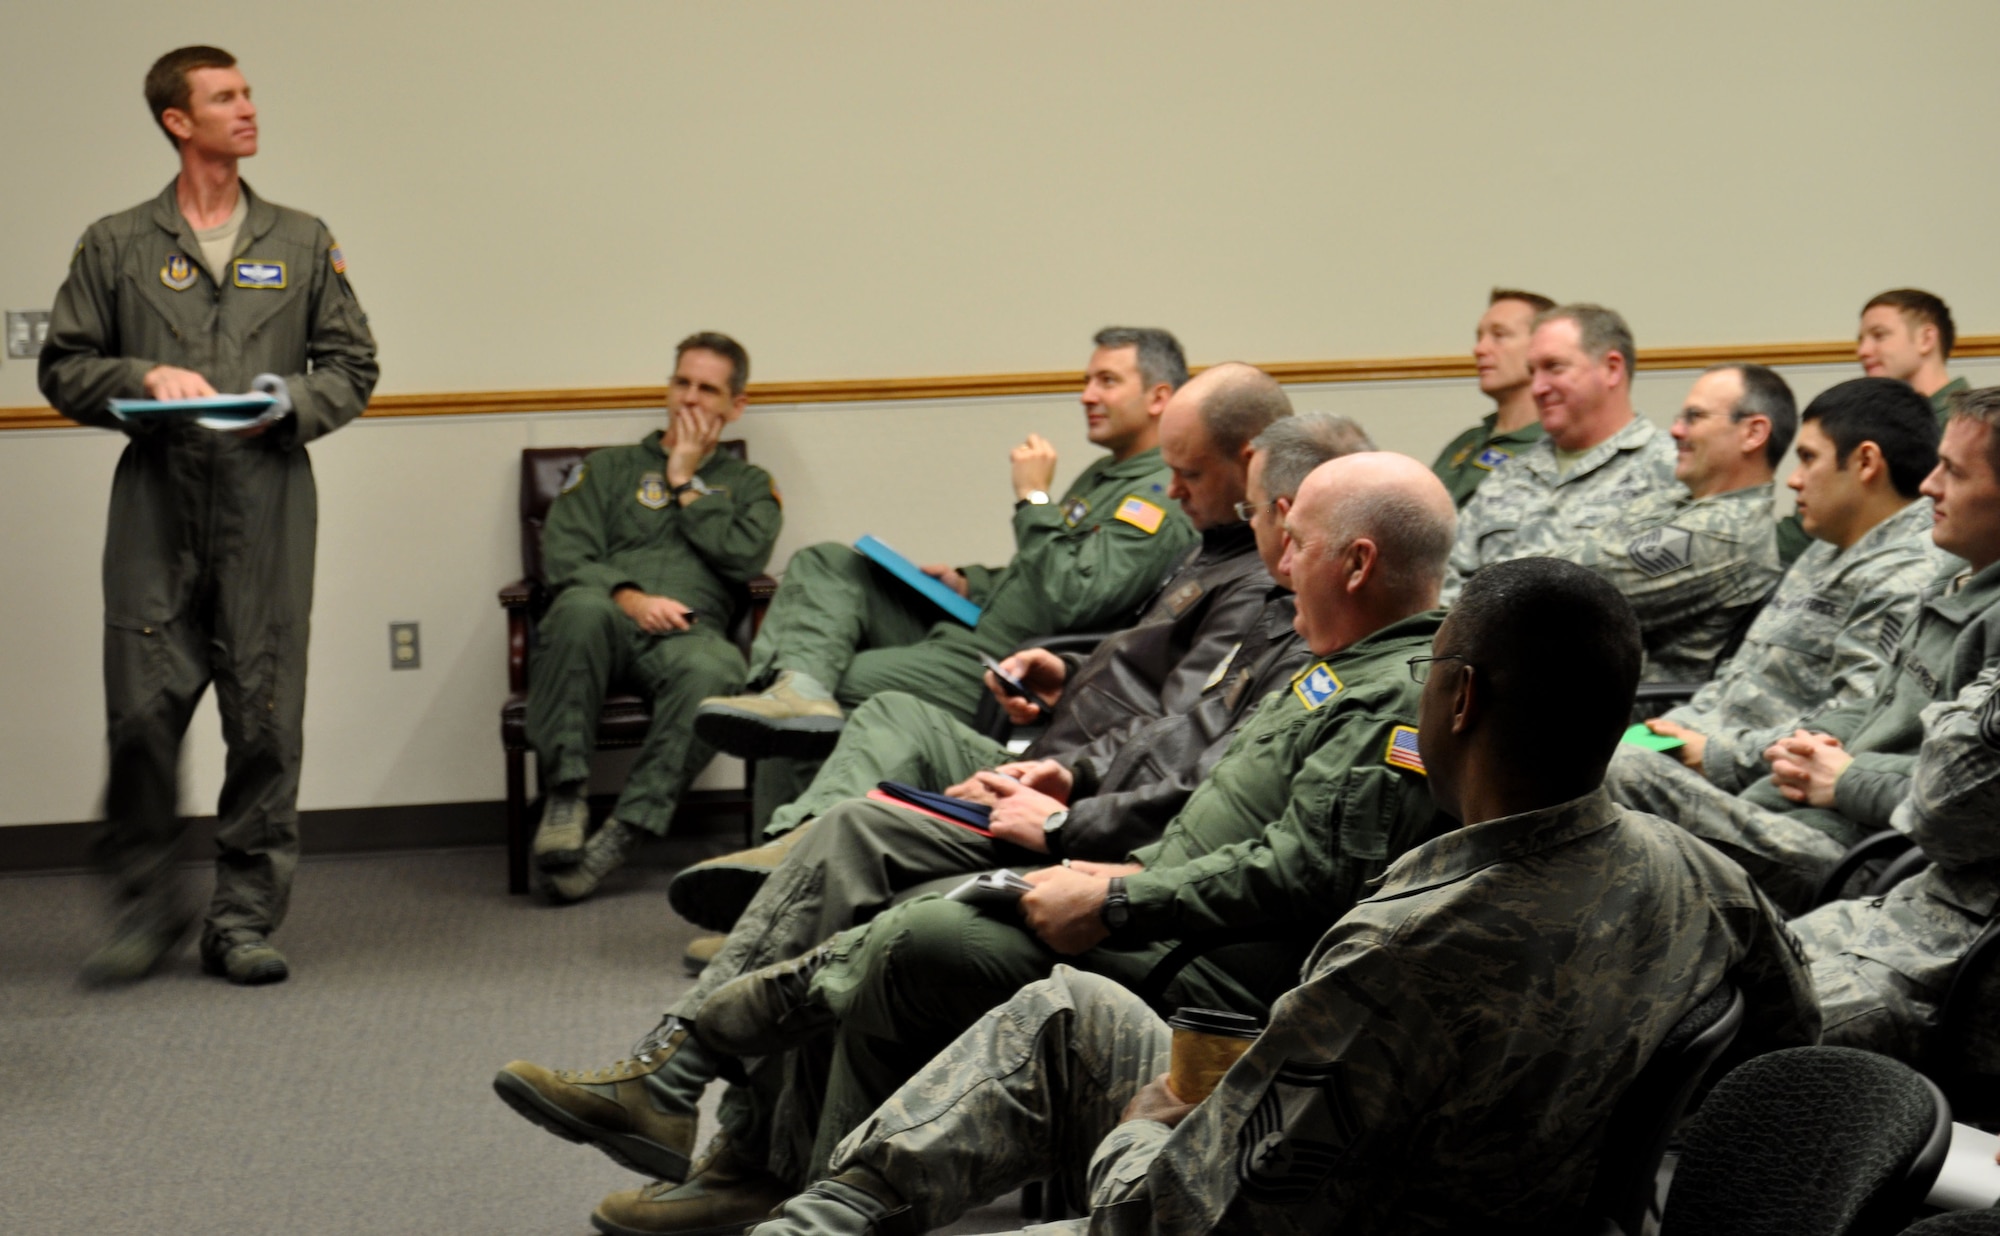 Lt. Col. Scott Amerman (left) takes role for an Operation Deep Freeze pre-departure briefing Jan. 6. The group of 35 Airmen from both the 446th and 62nd Airlift Wings are preparing to fly to Chrischurch, New Zealand to carry out the last nine missions of the ODF 2012-2013 season in Antarctica. (U.S. Air Force Photo/Airman 1st Class Madelyn McCullough)